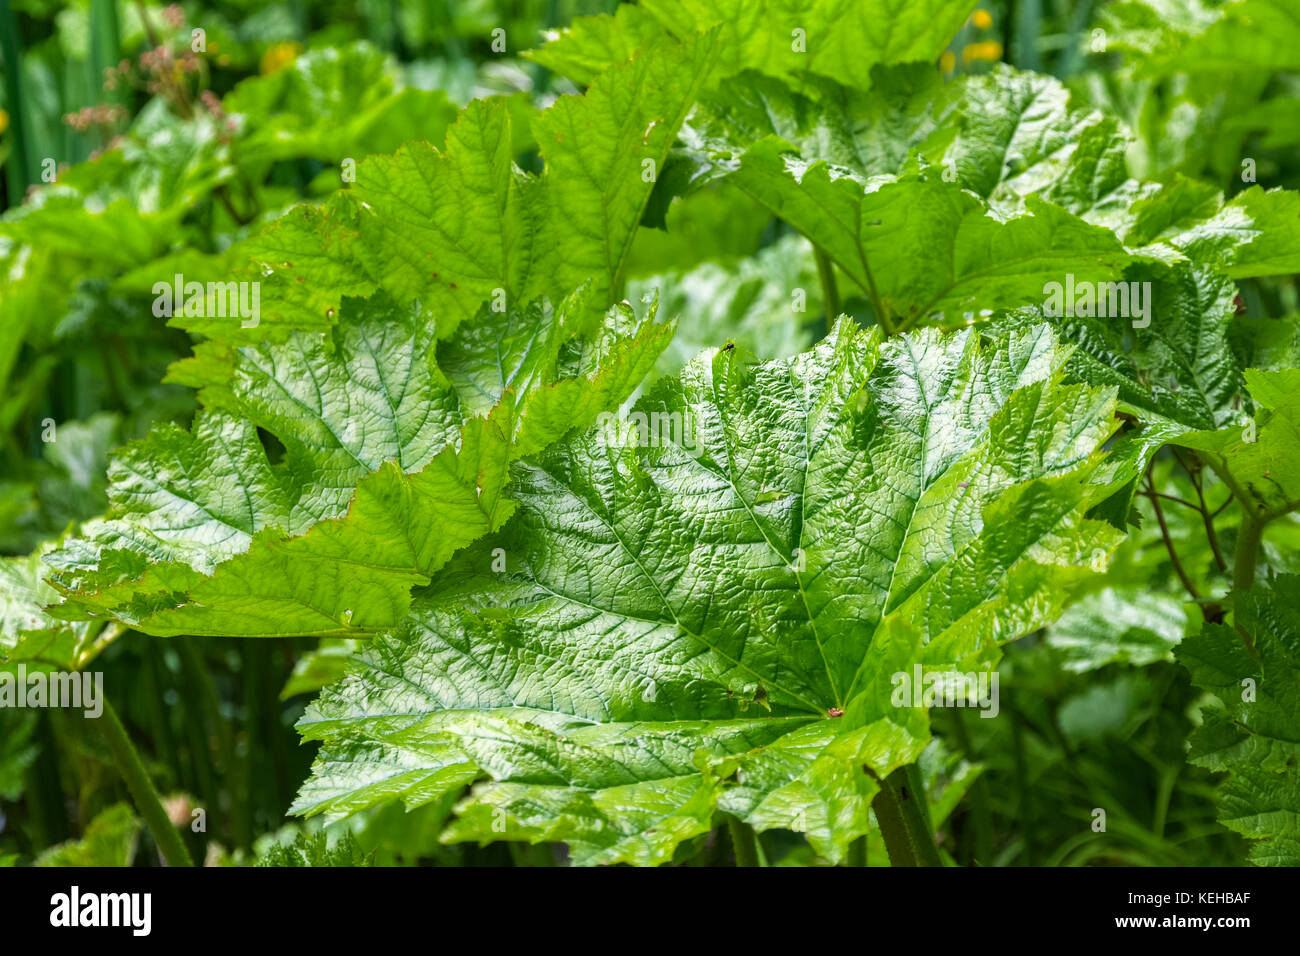 Gunnera manicata, known as Brazilian giant rhubarb, in Isabella Plantation, a woodland garden in Richmond Park in south west London Stock Photo